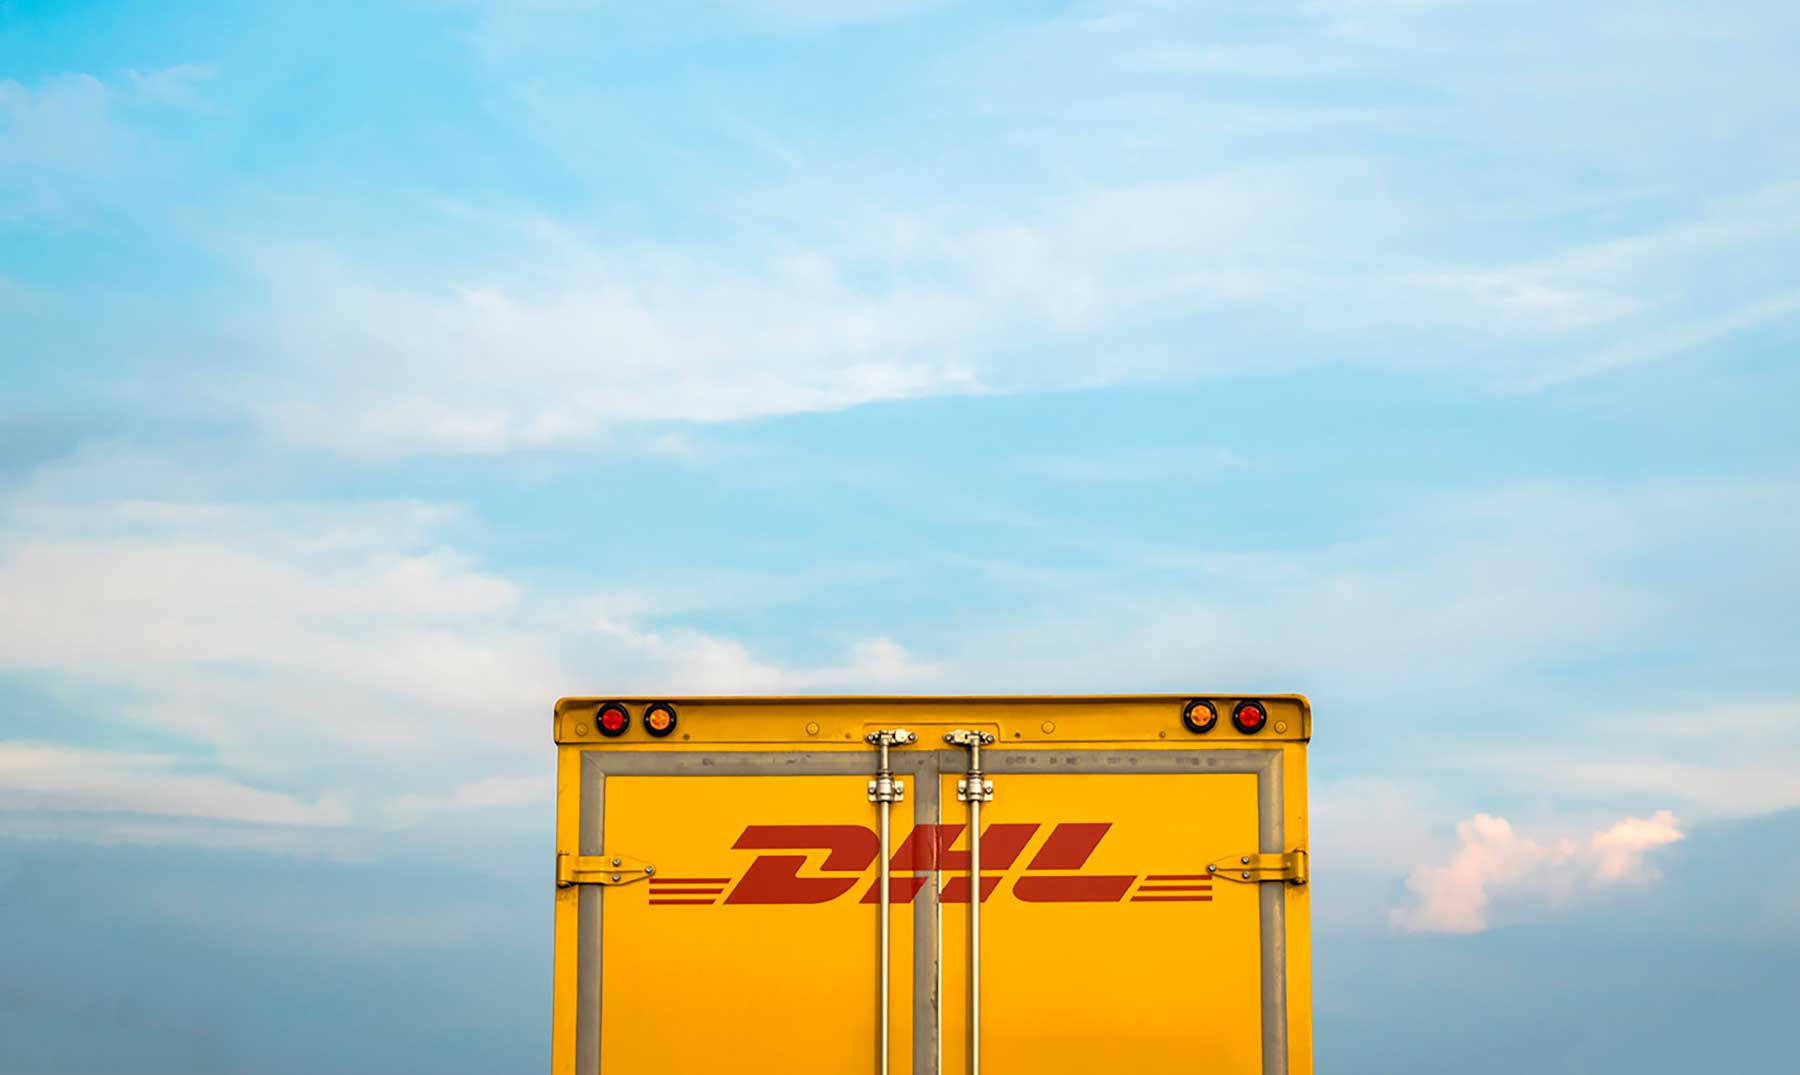 Dhl Courier Truck Doors Background